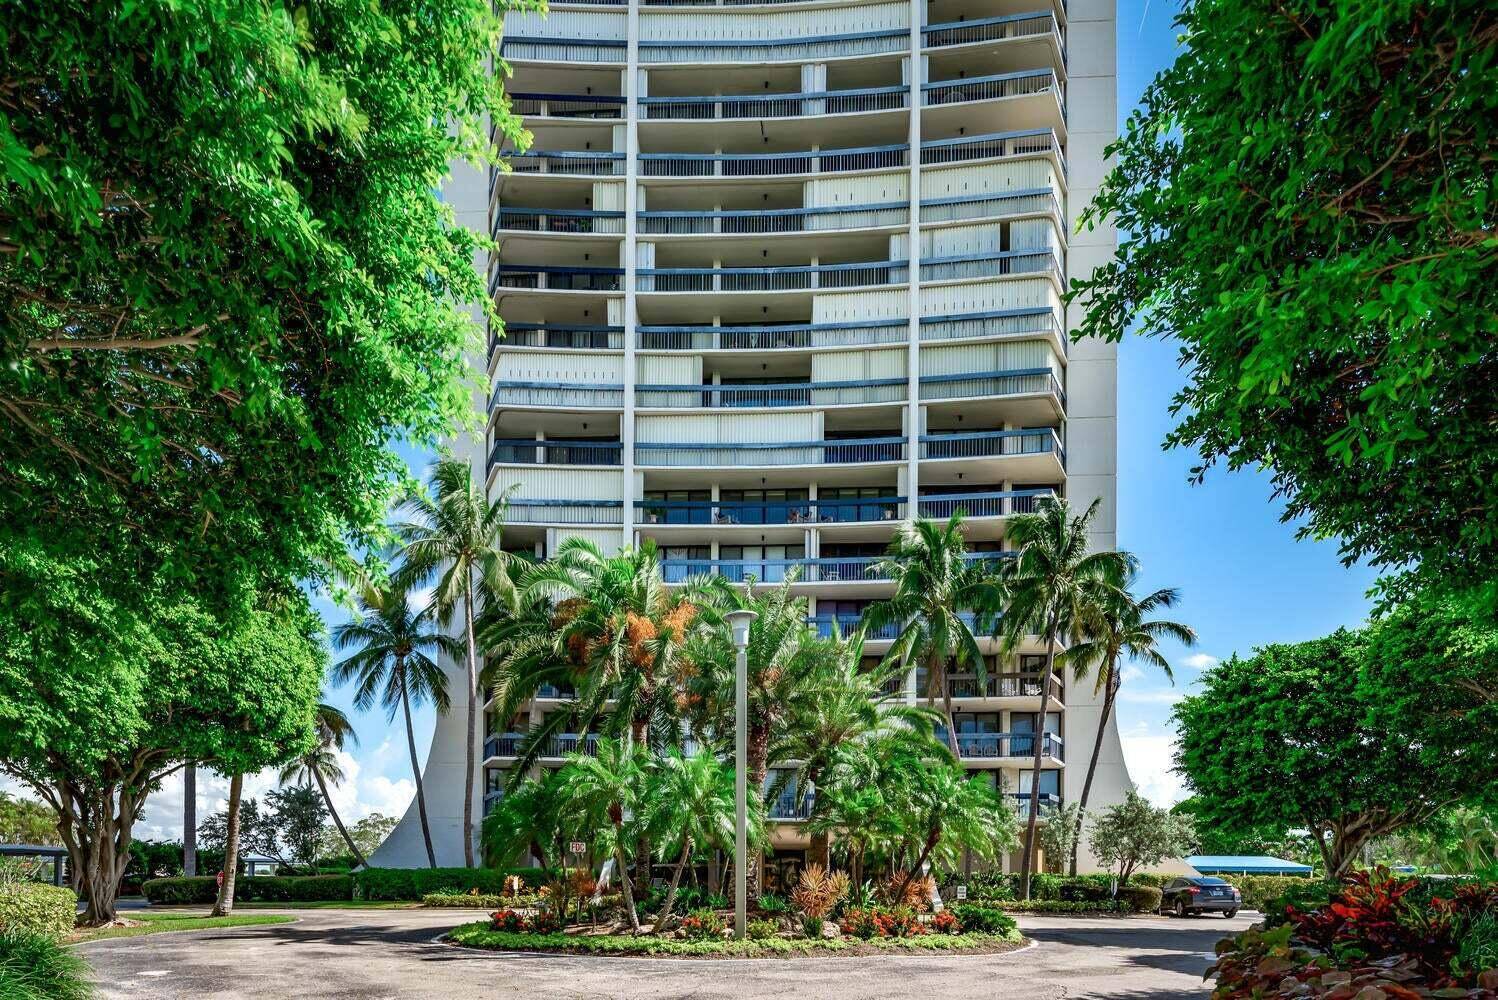 Enjoy these Magnificent views from either of the 2 balconies in this Beautiful 2 bedroom 2 bath corner unit with open kitchen in Prestigious gated community of Lands of the ...